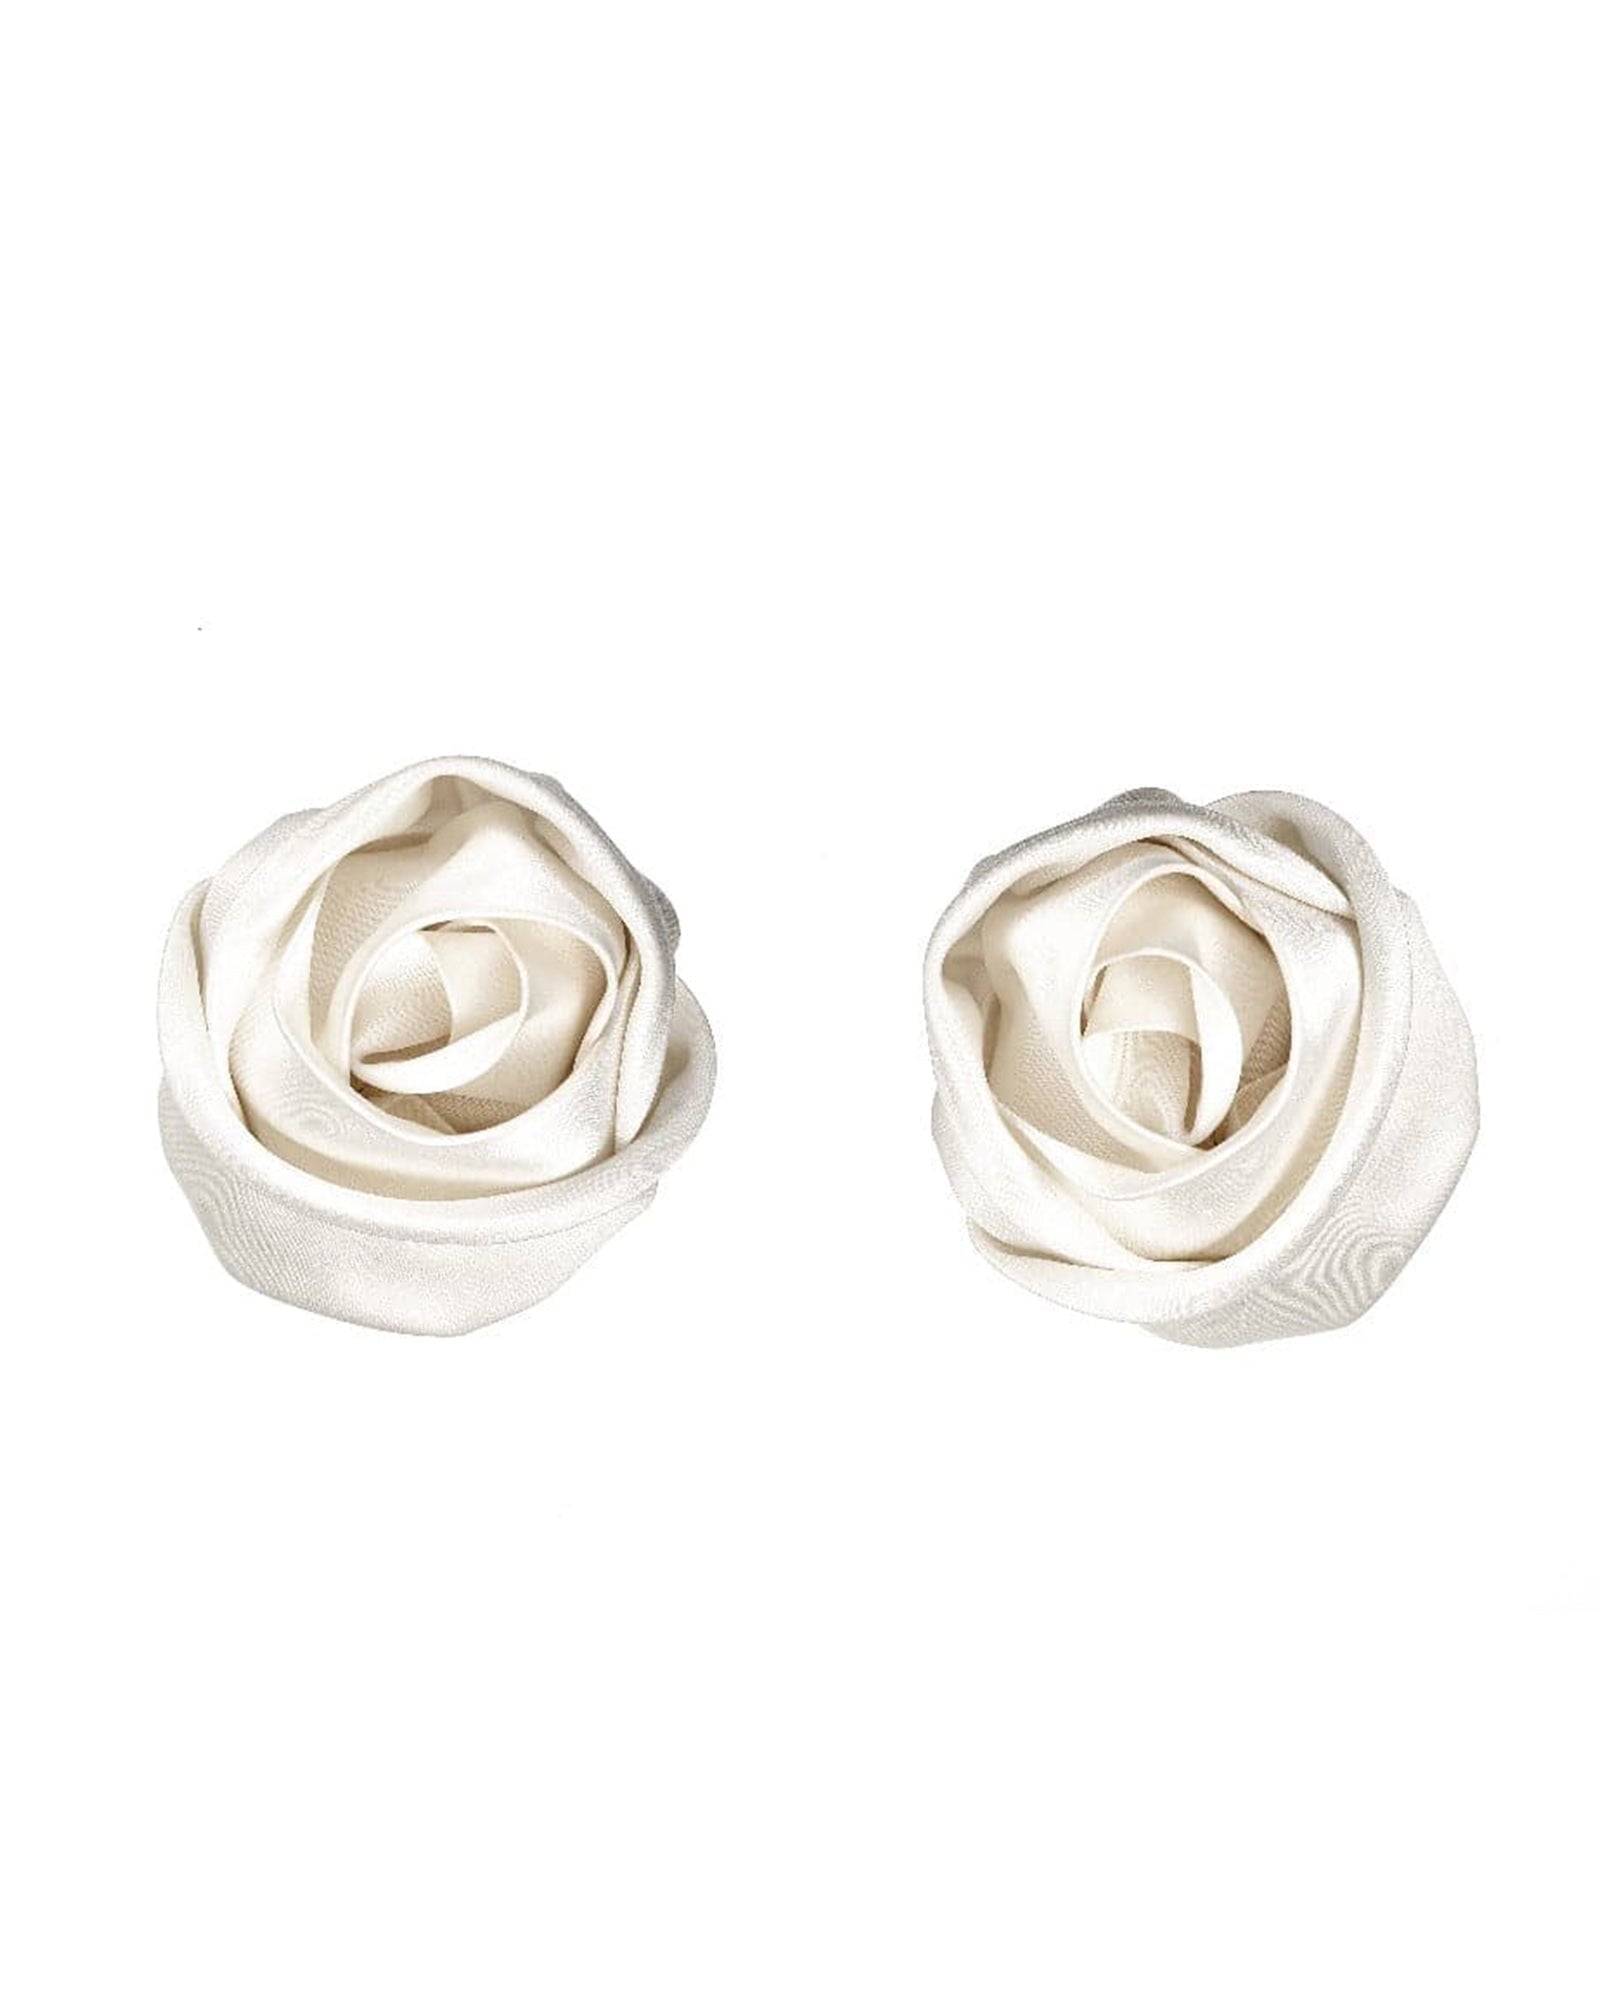 Ruched Rose Shoe Clips image